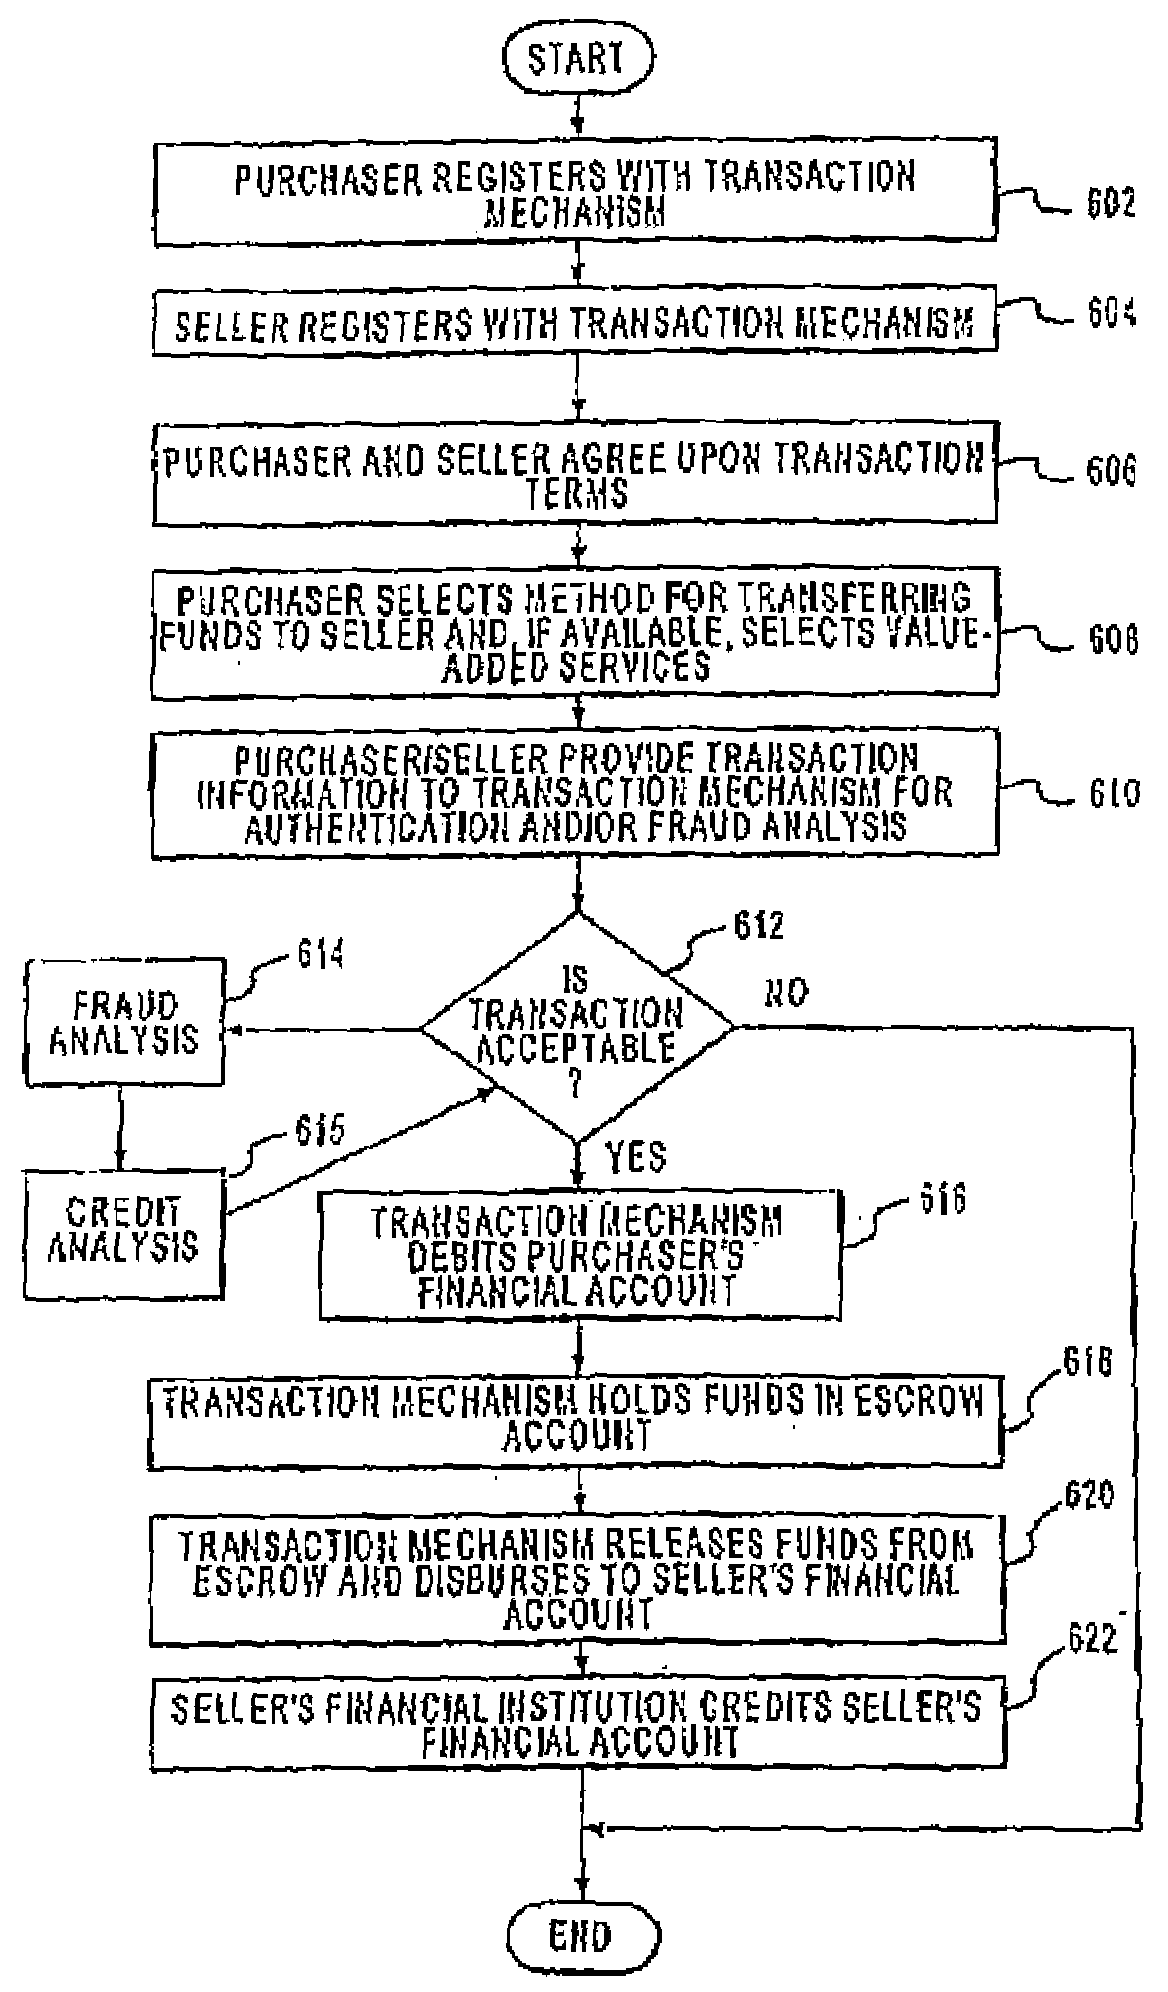 Systems and methods for maximizing a rewards accumulation strategy during transaction processing